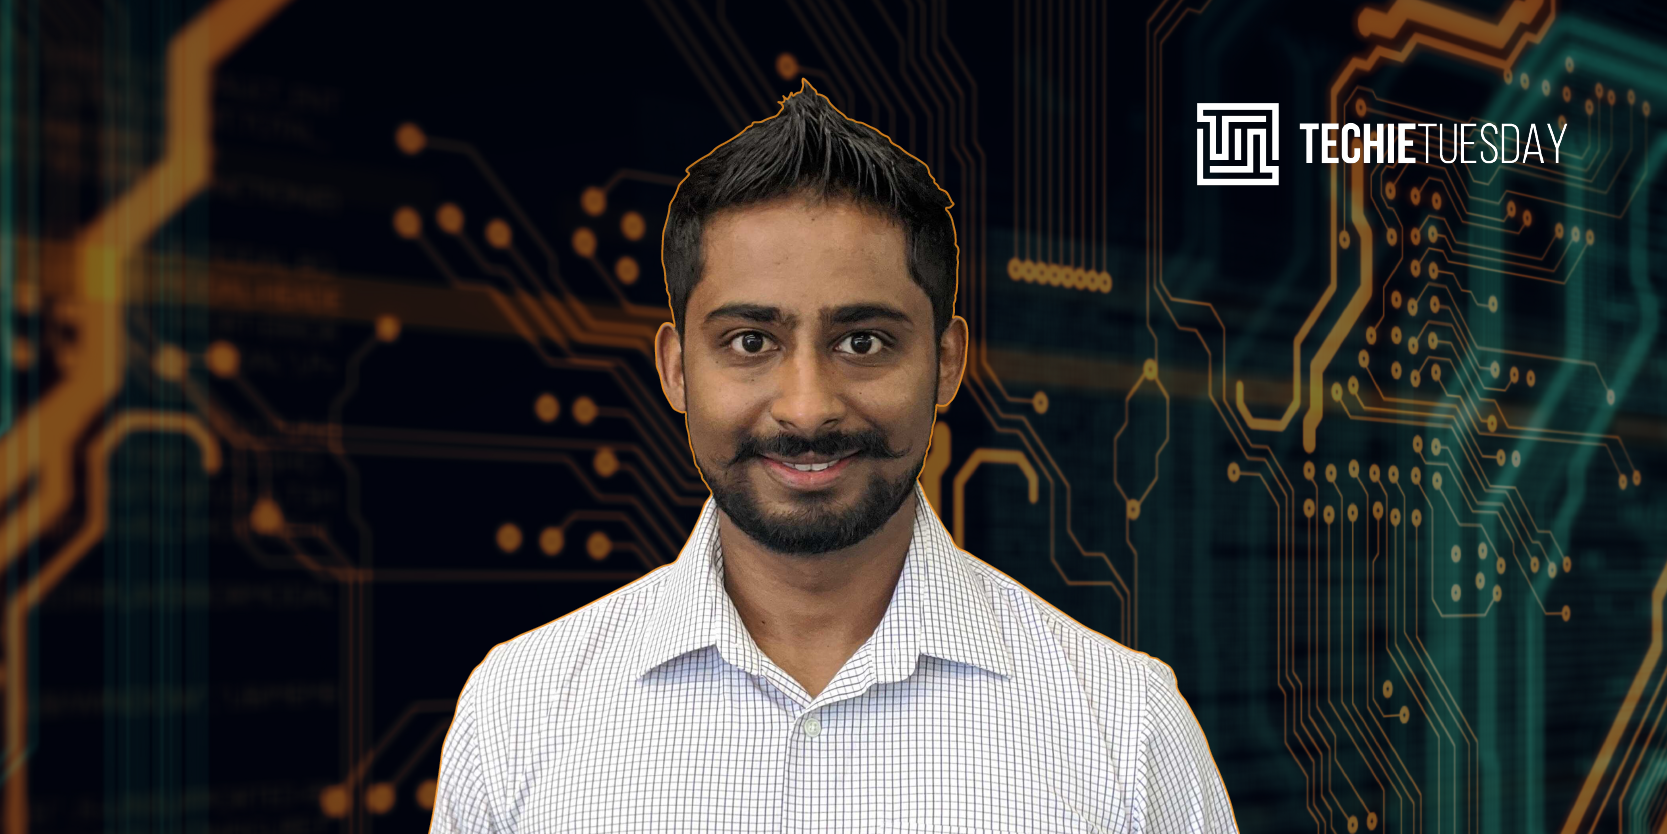 [Techie Tuesday] Meet Saiman Shetty, who went from a small town near Udupi to building powertrain systems at Tesla 